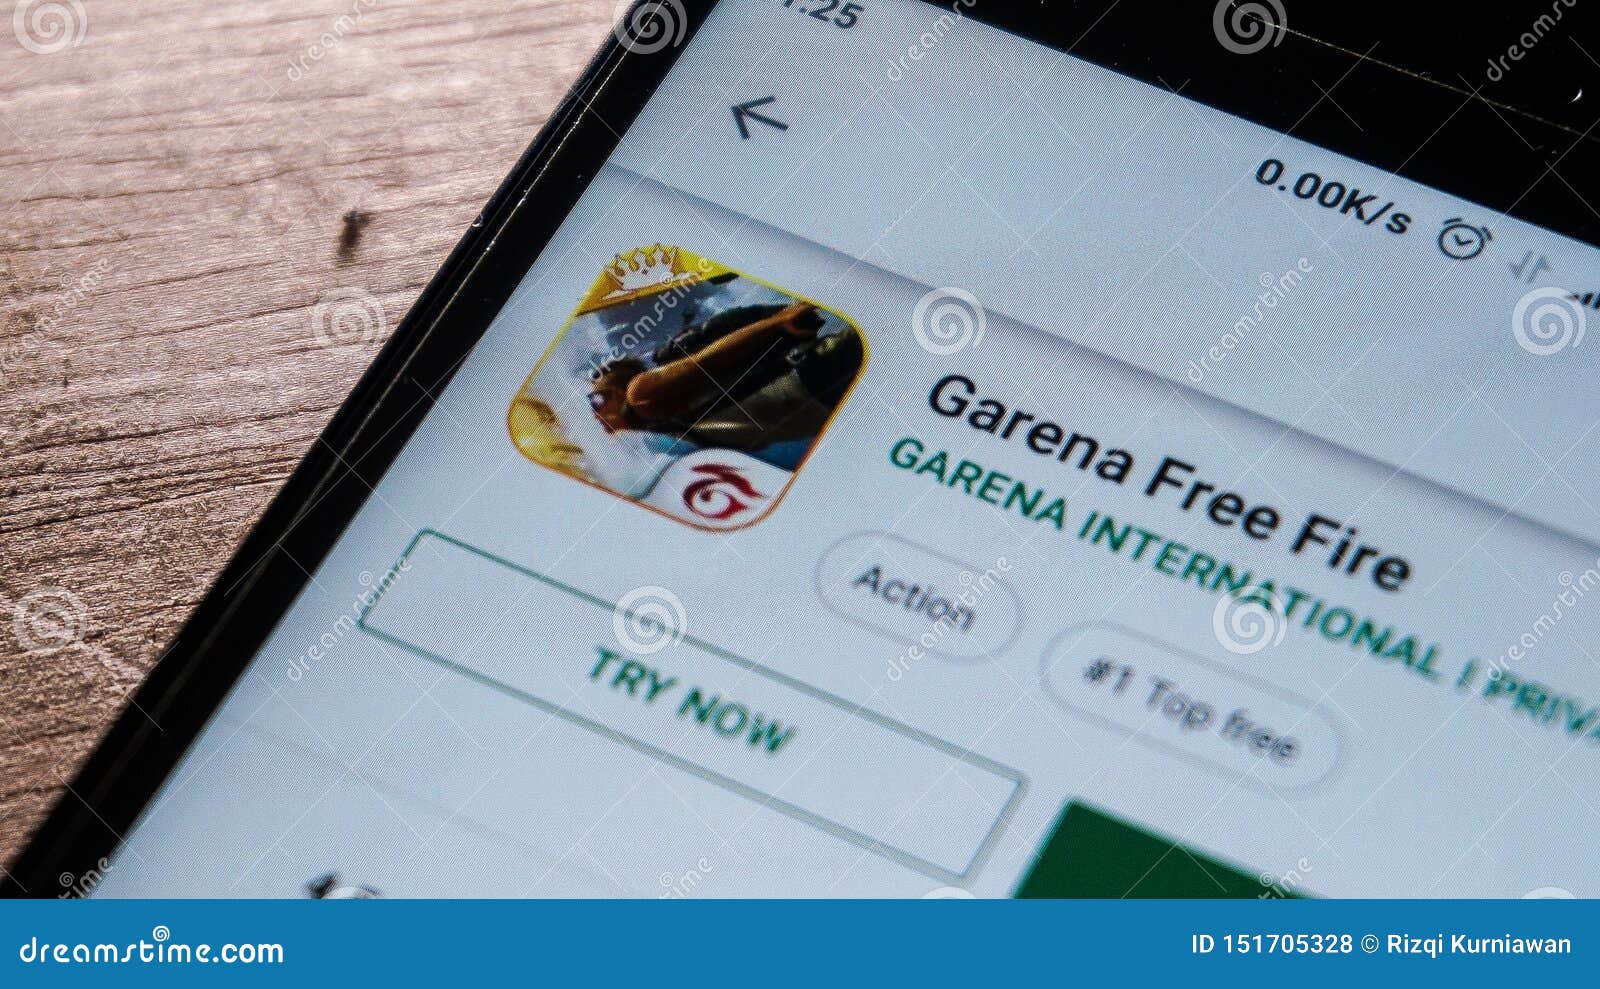 Garena Free Fire App In Play Store Editorial Stock Photo Image Of Browser Battle 151705328